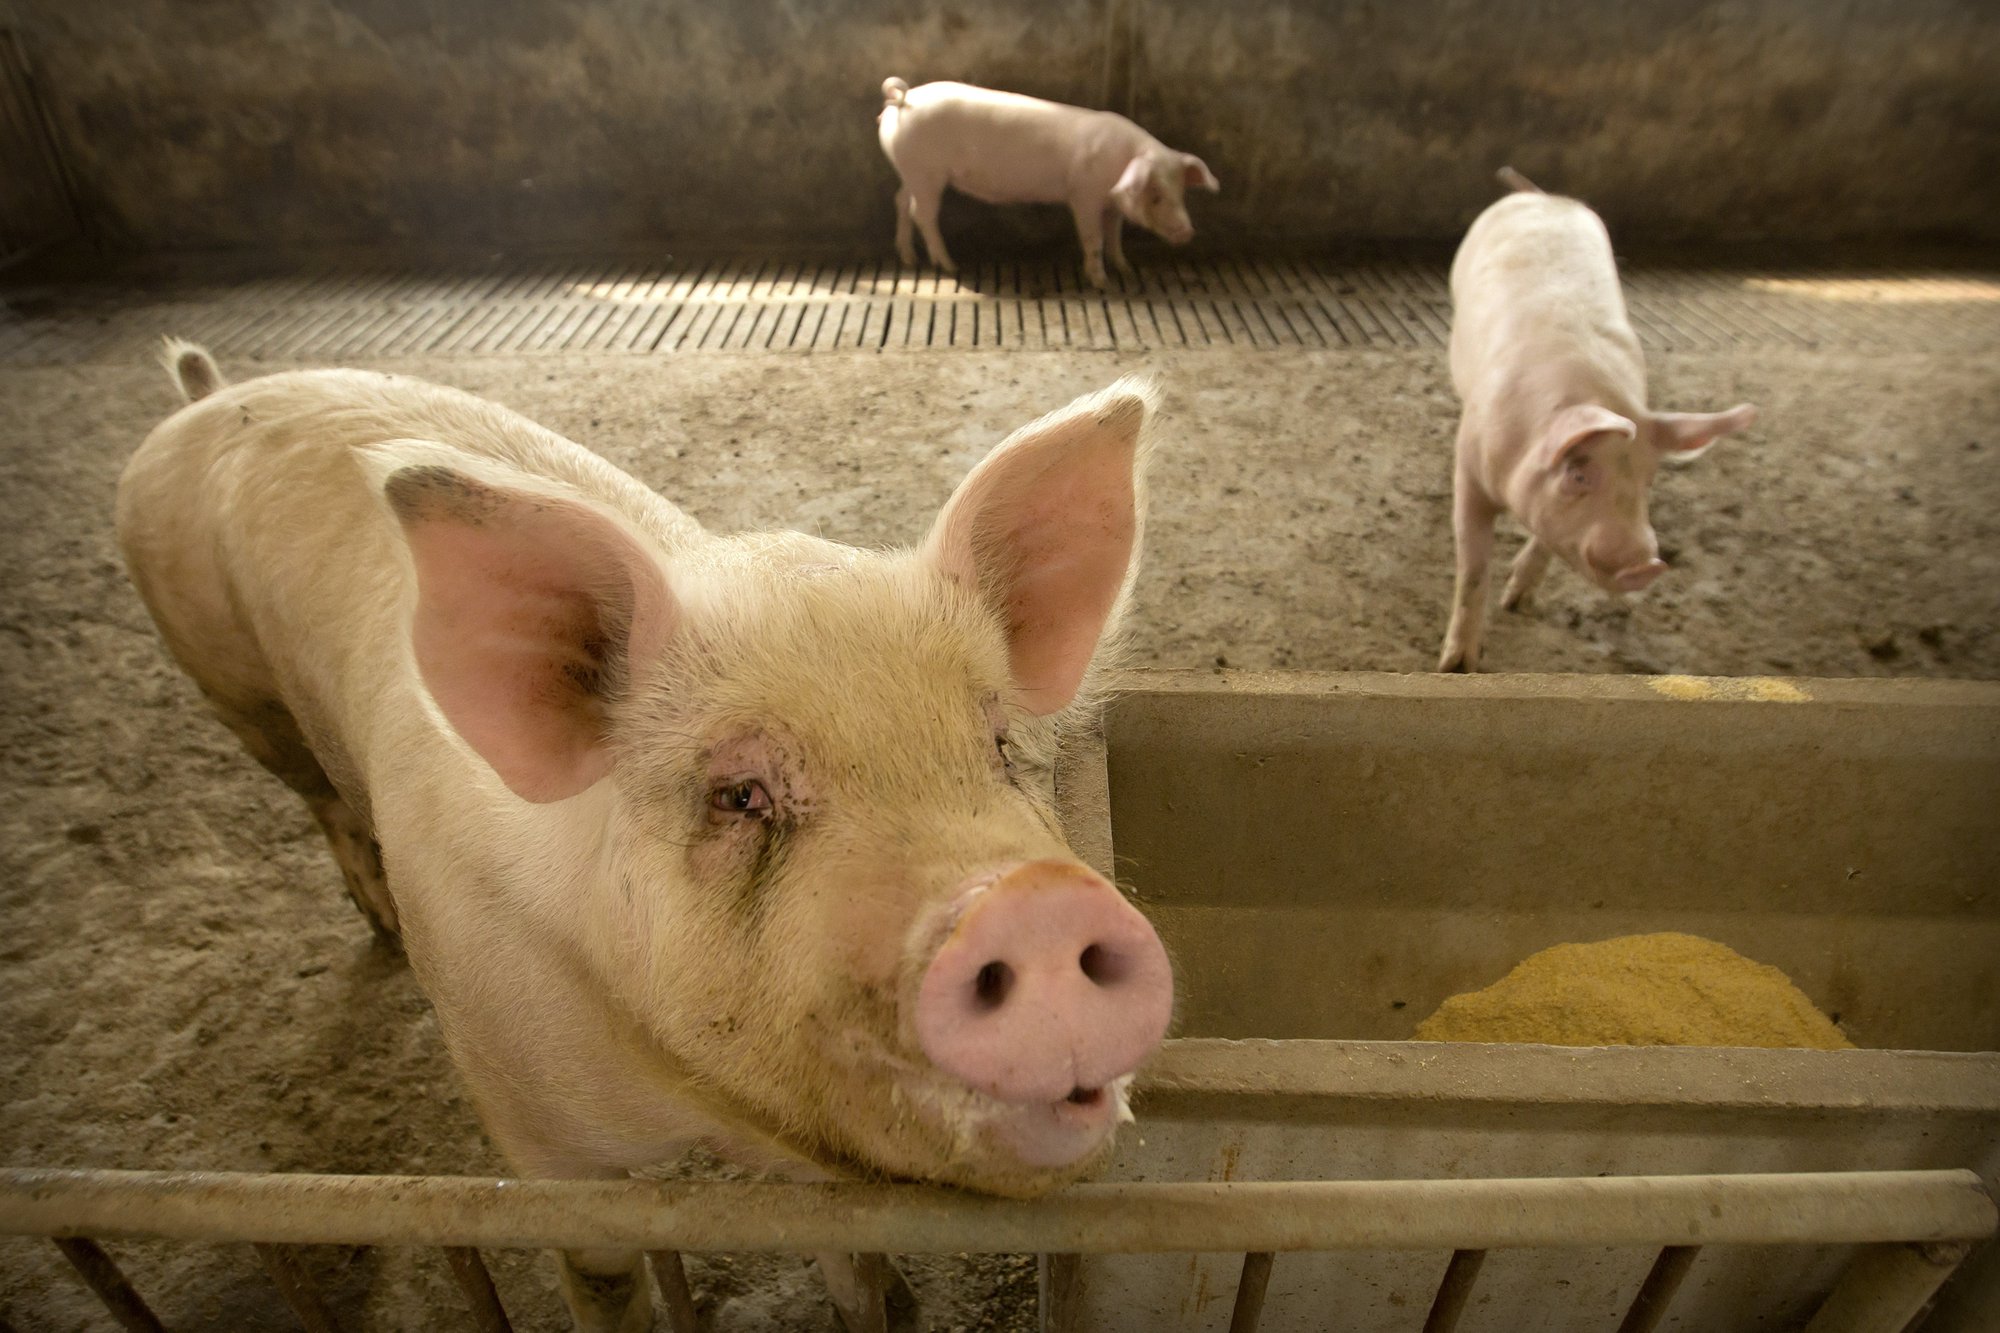 China’s pig disease outbreak pushes up global pork prices